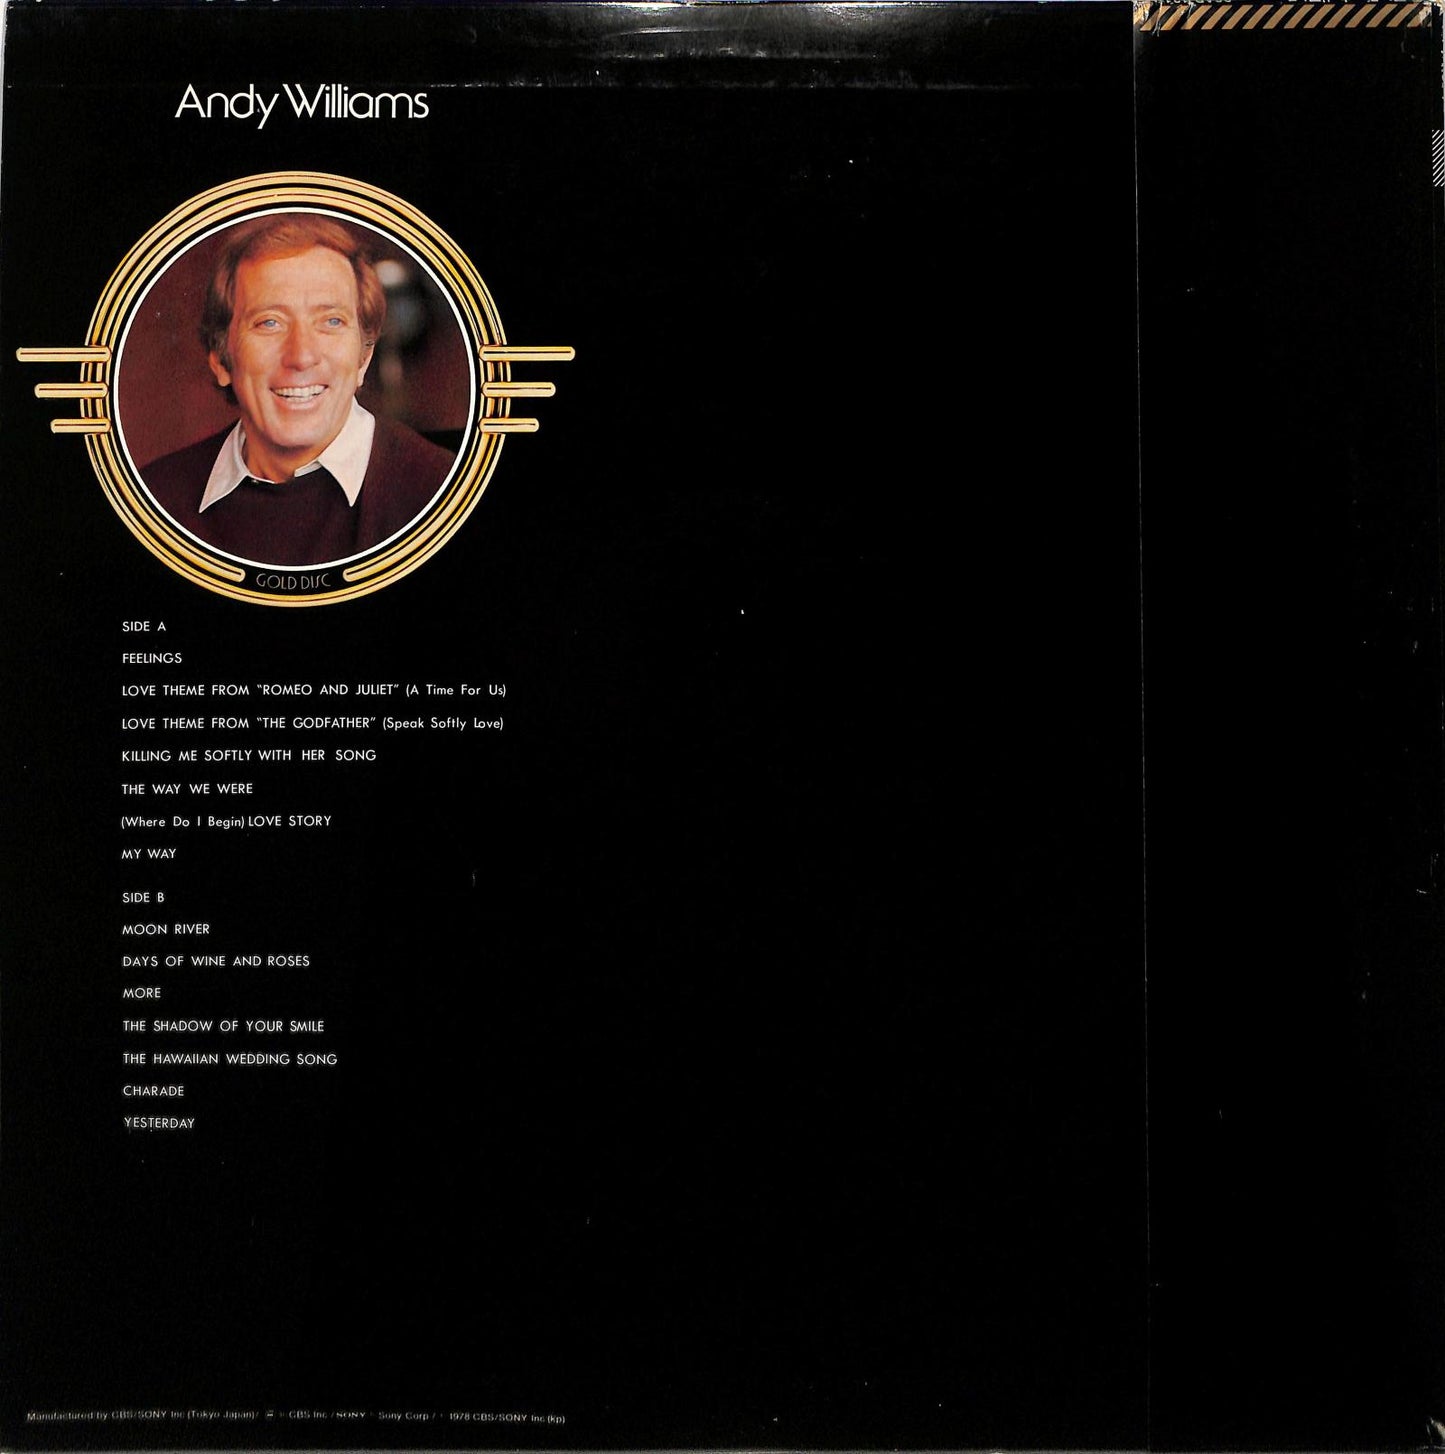 ANDY WILLIAMS - Gold Disc